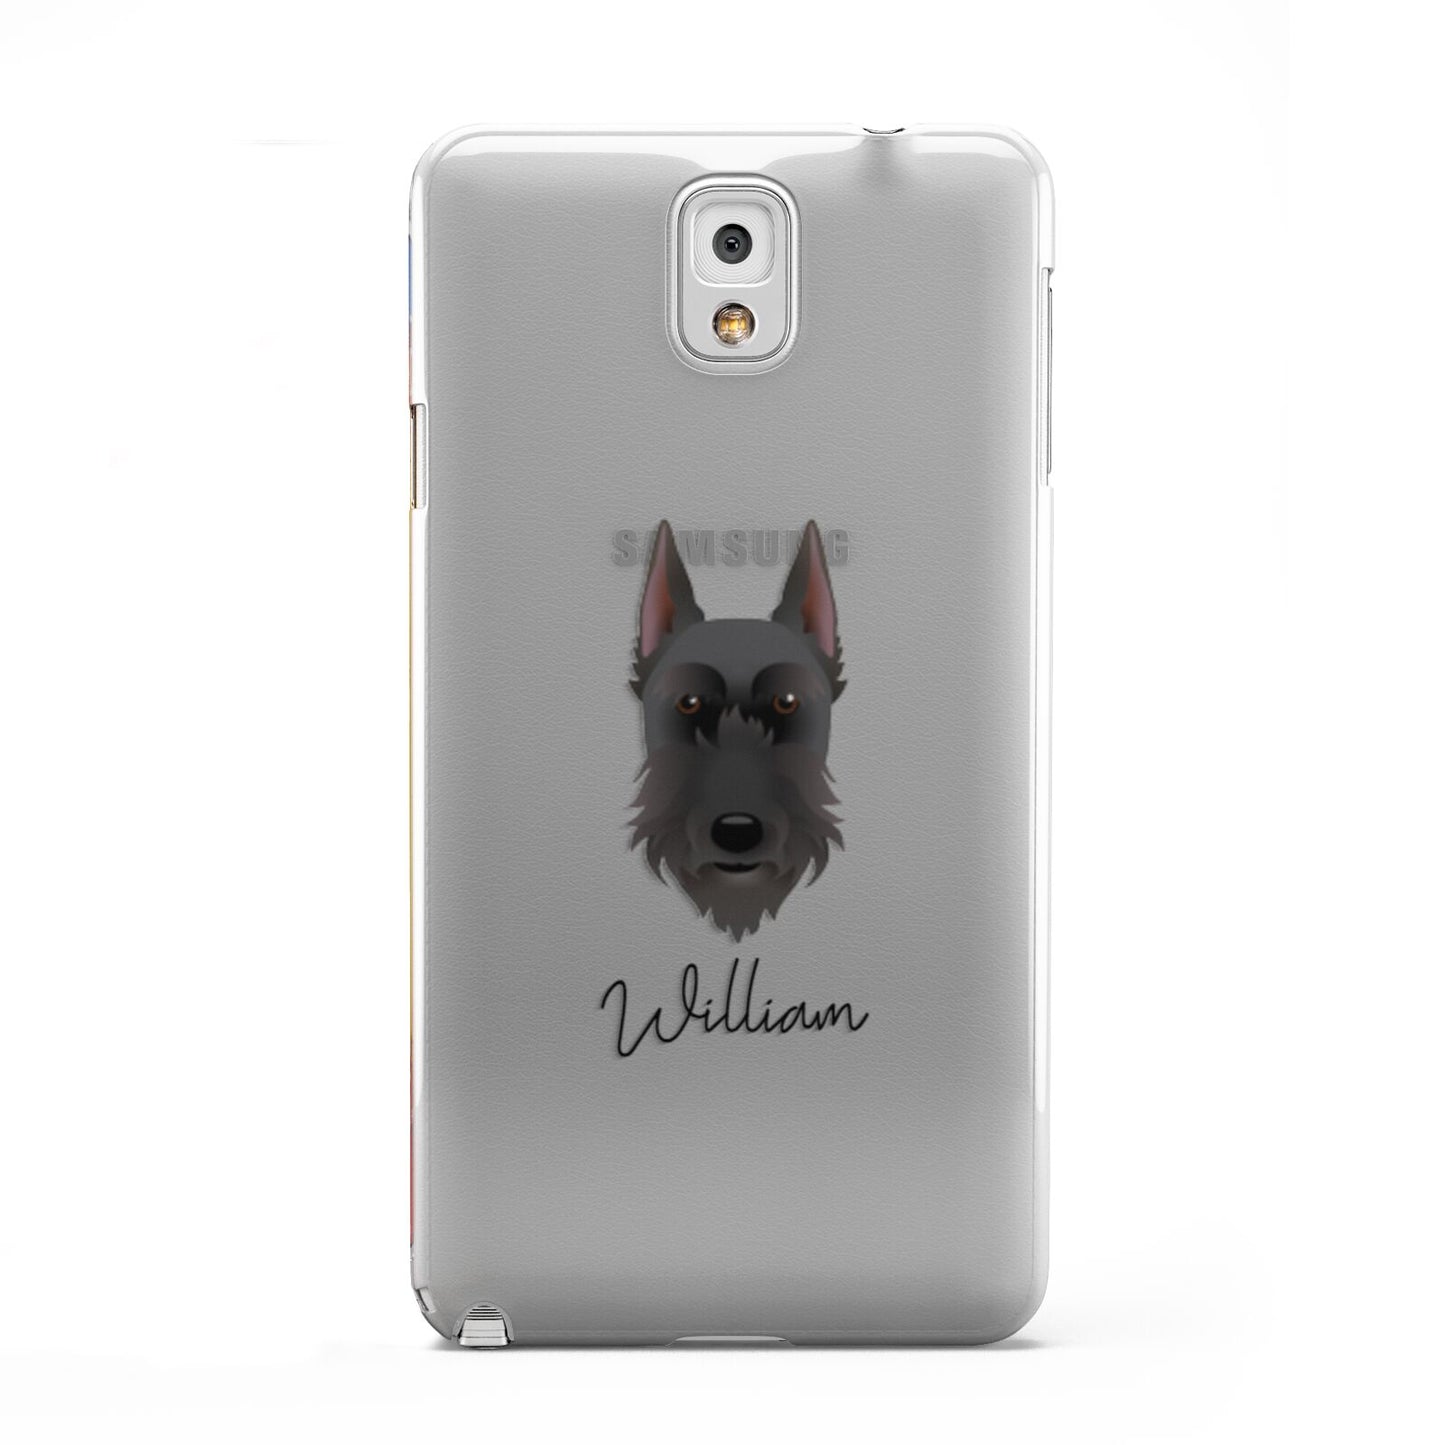 Giant Schnauzer Personalised Samsung Galaxy Note 3 Case